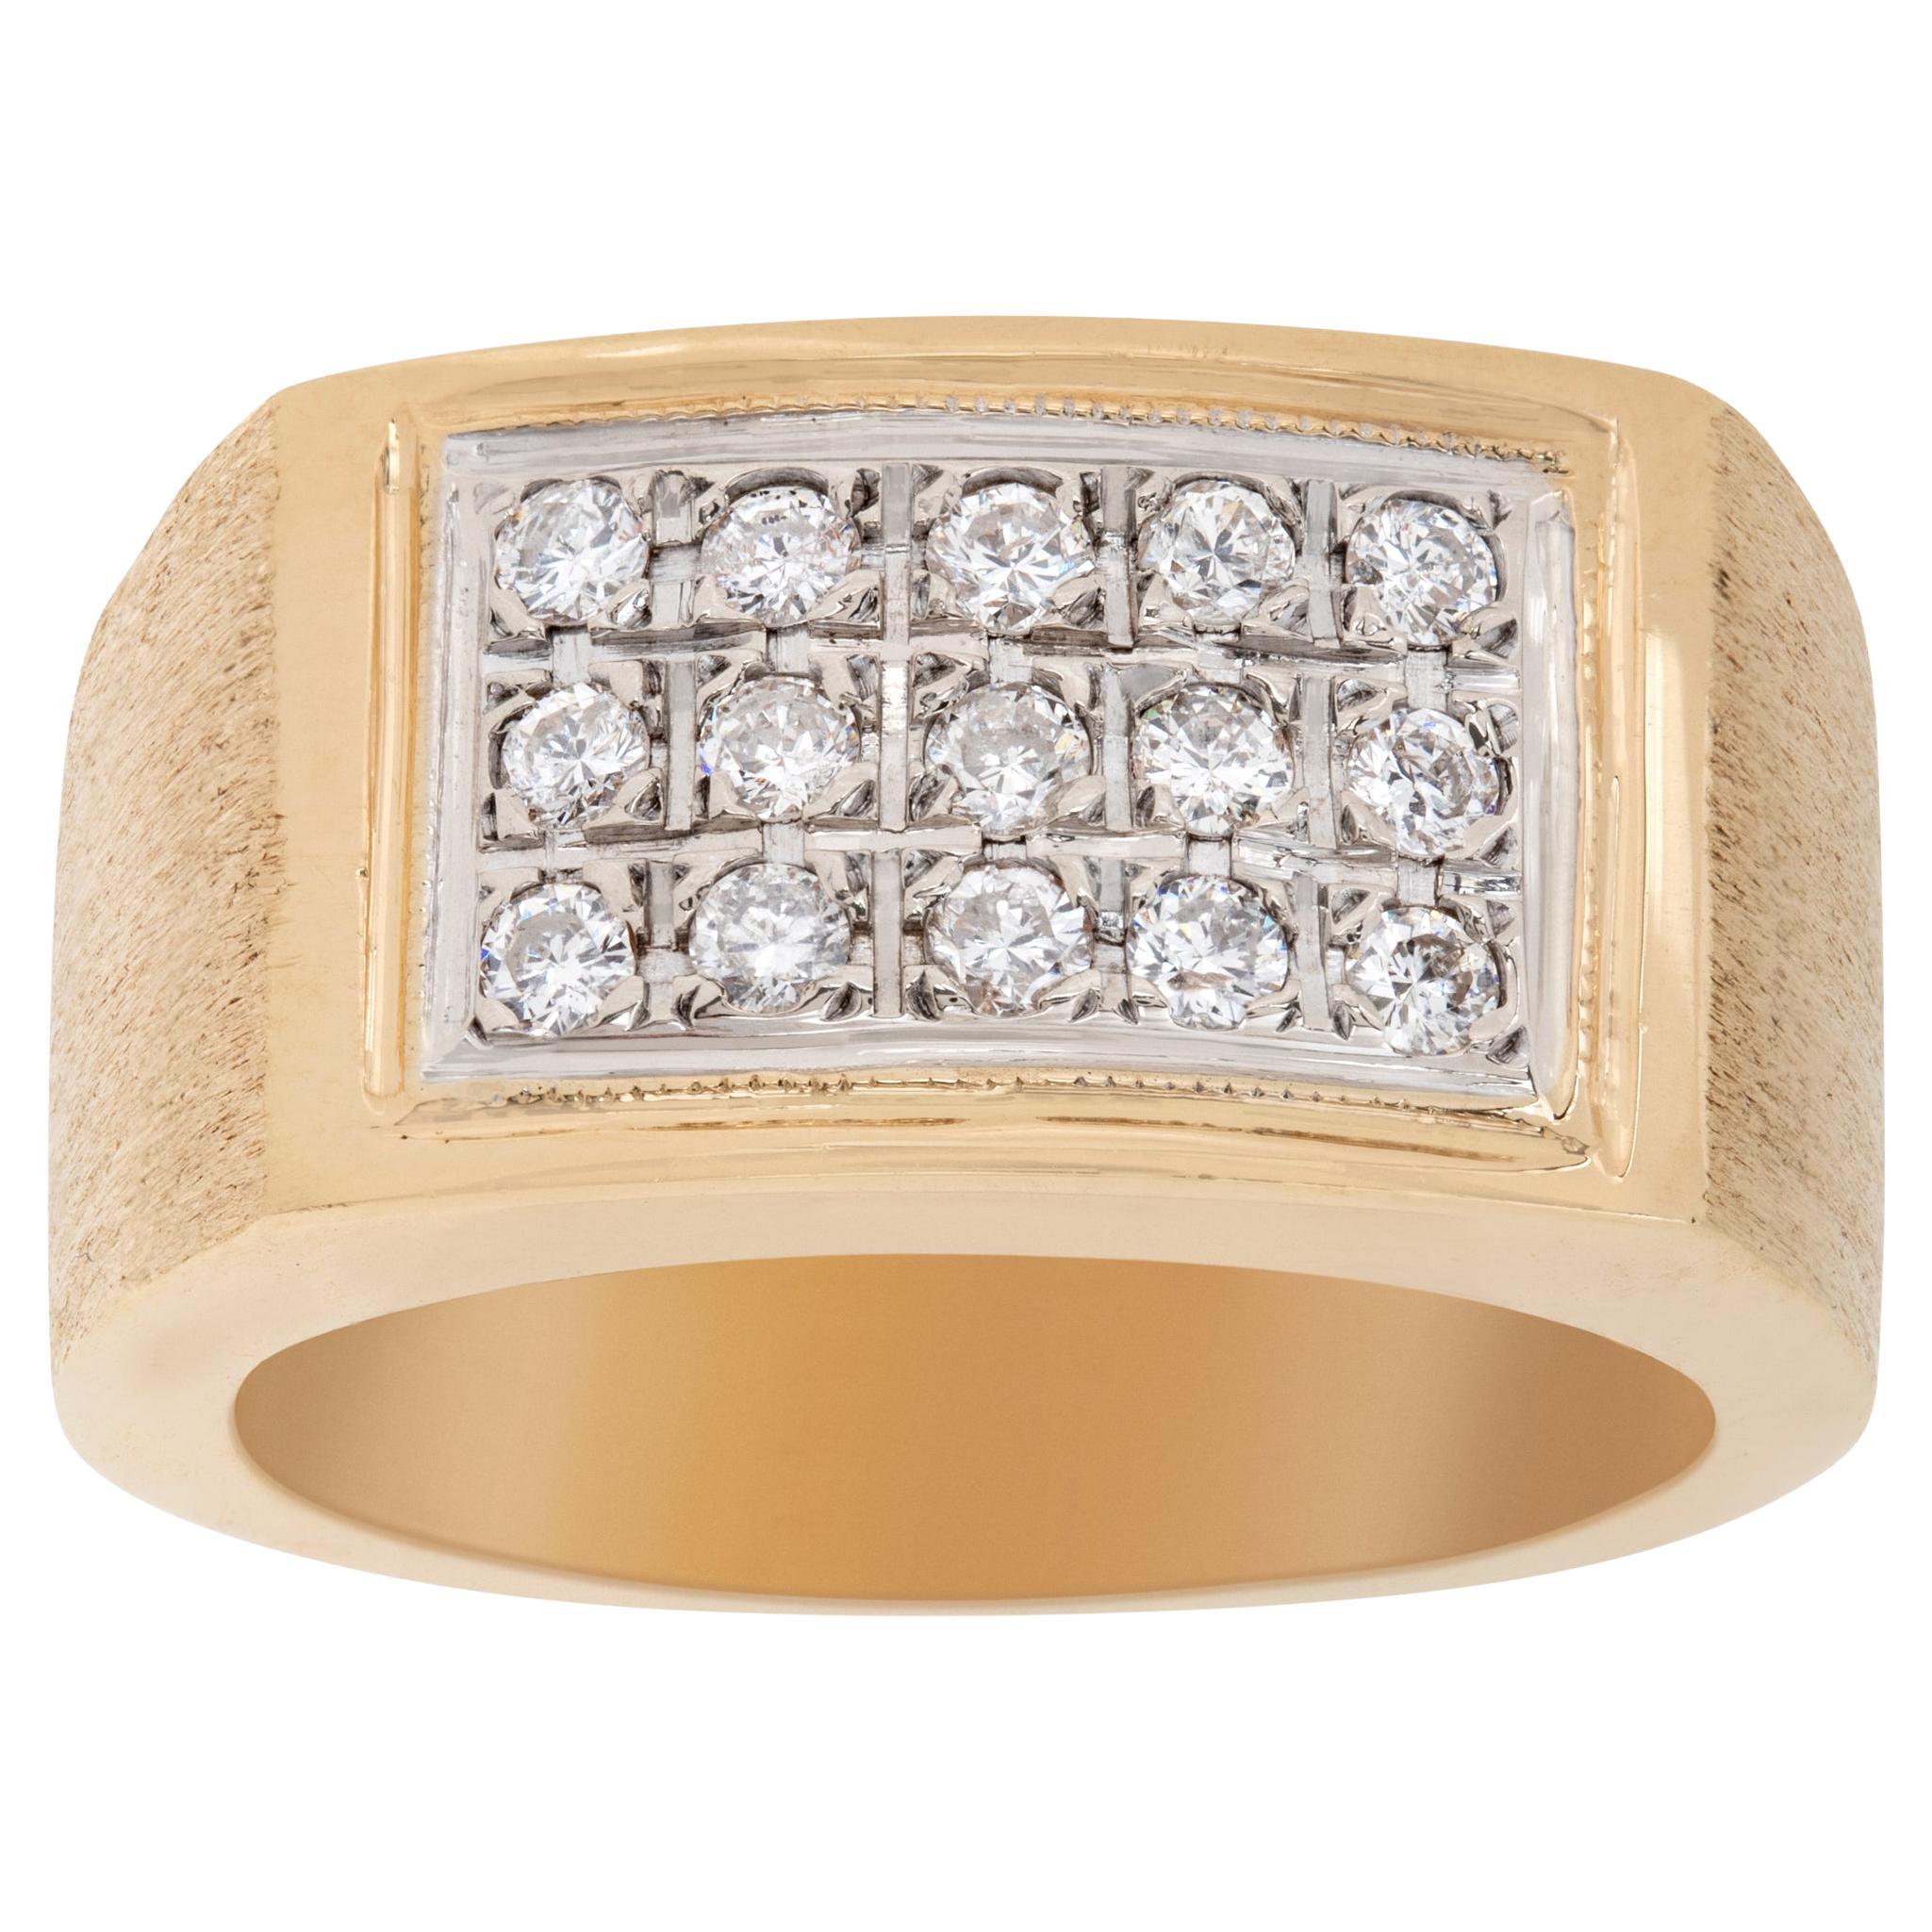 Gents Solid Diamond Ring in 14k Yellow Gold, 0.70 Carats in Diamonds For Sale